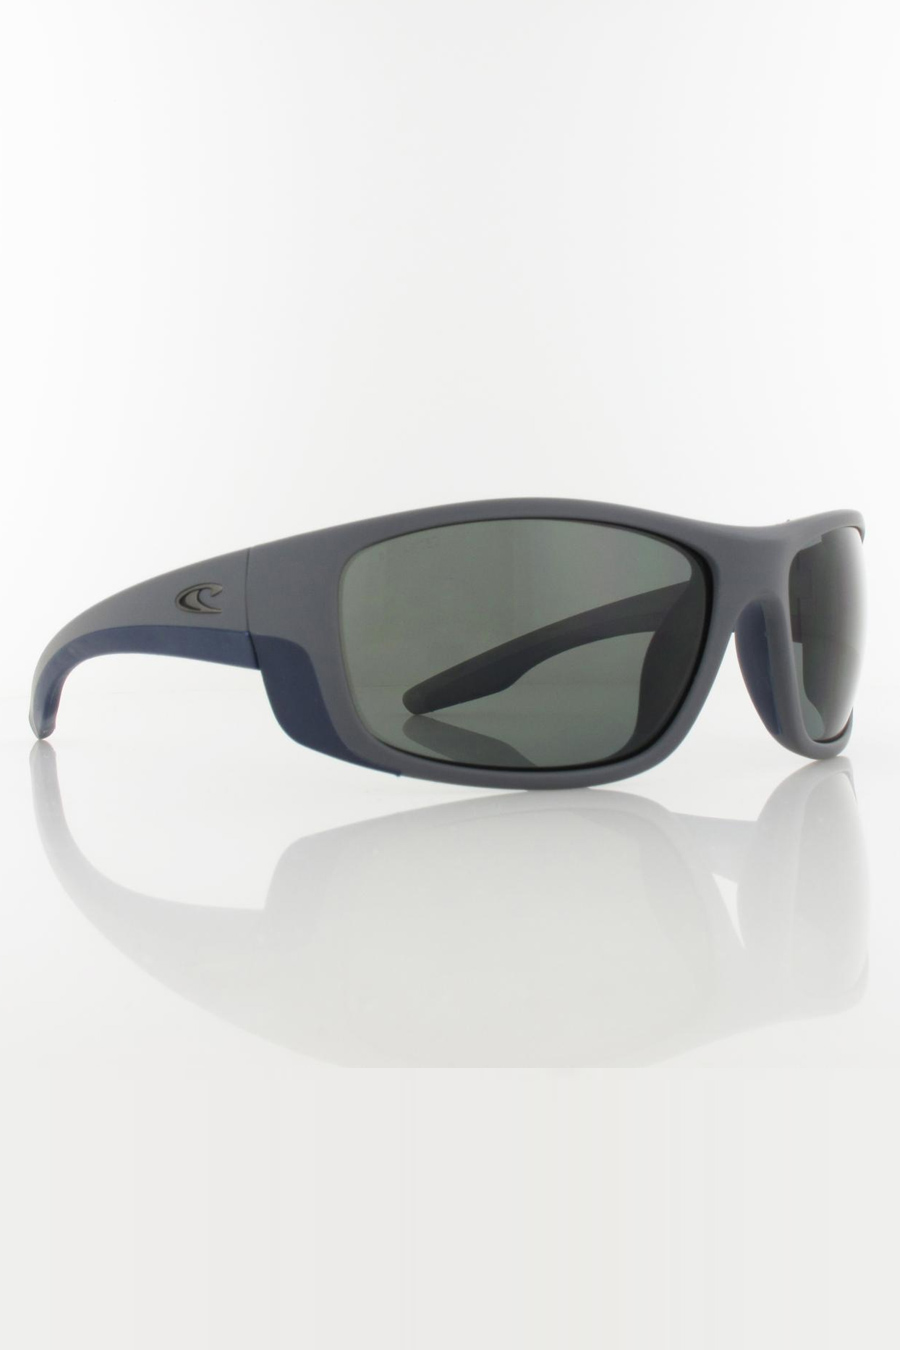 Saulesbrilles ONEILL ONS-9017-20-108P